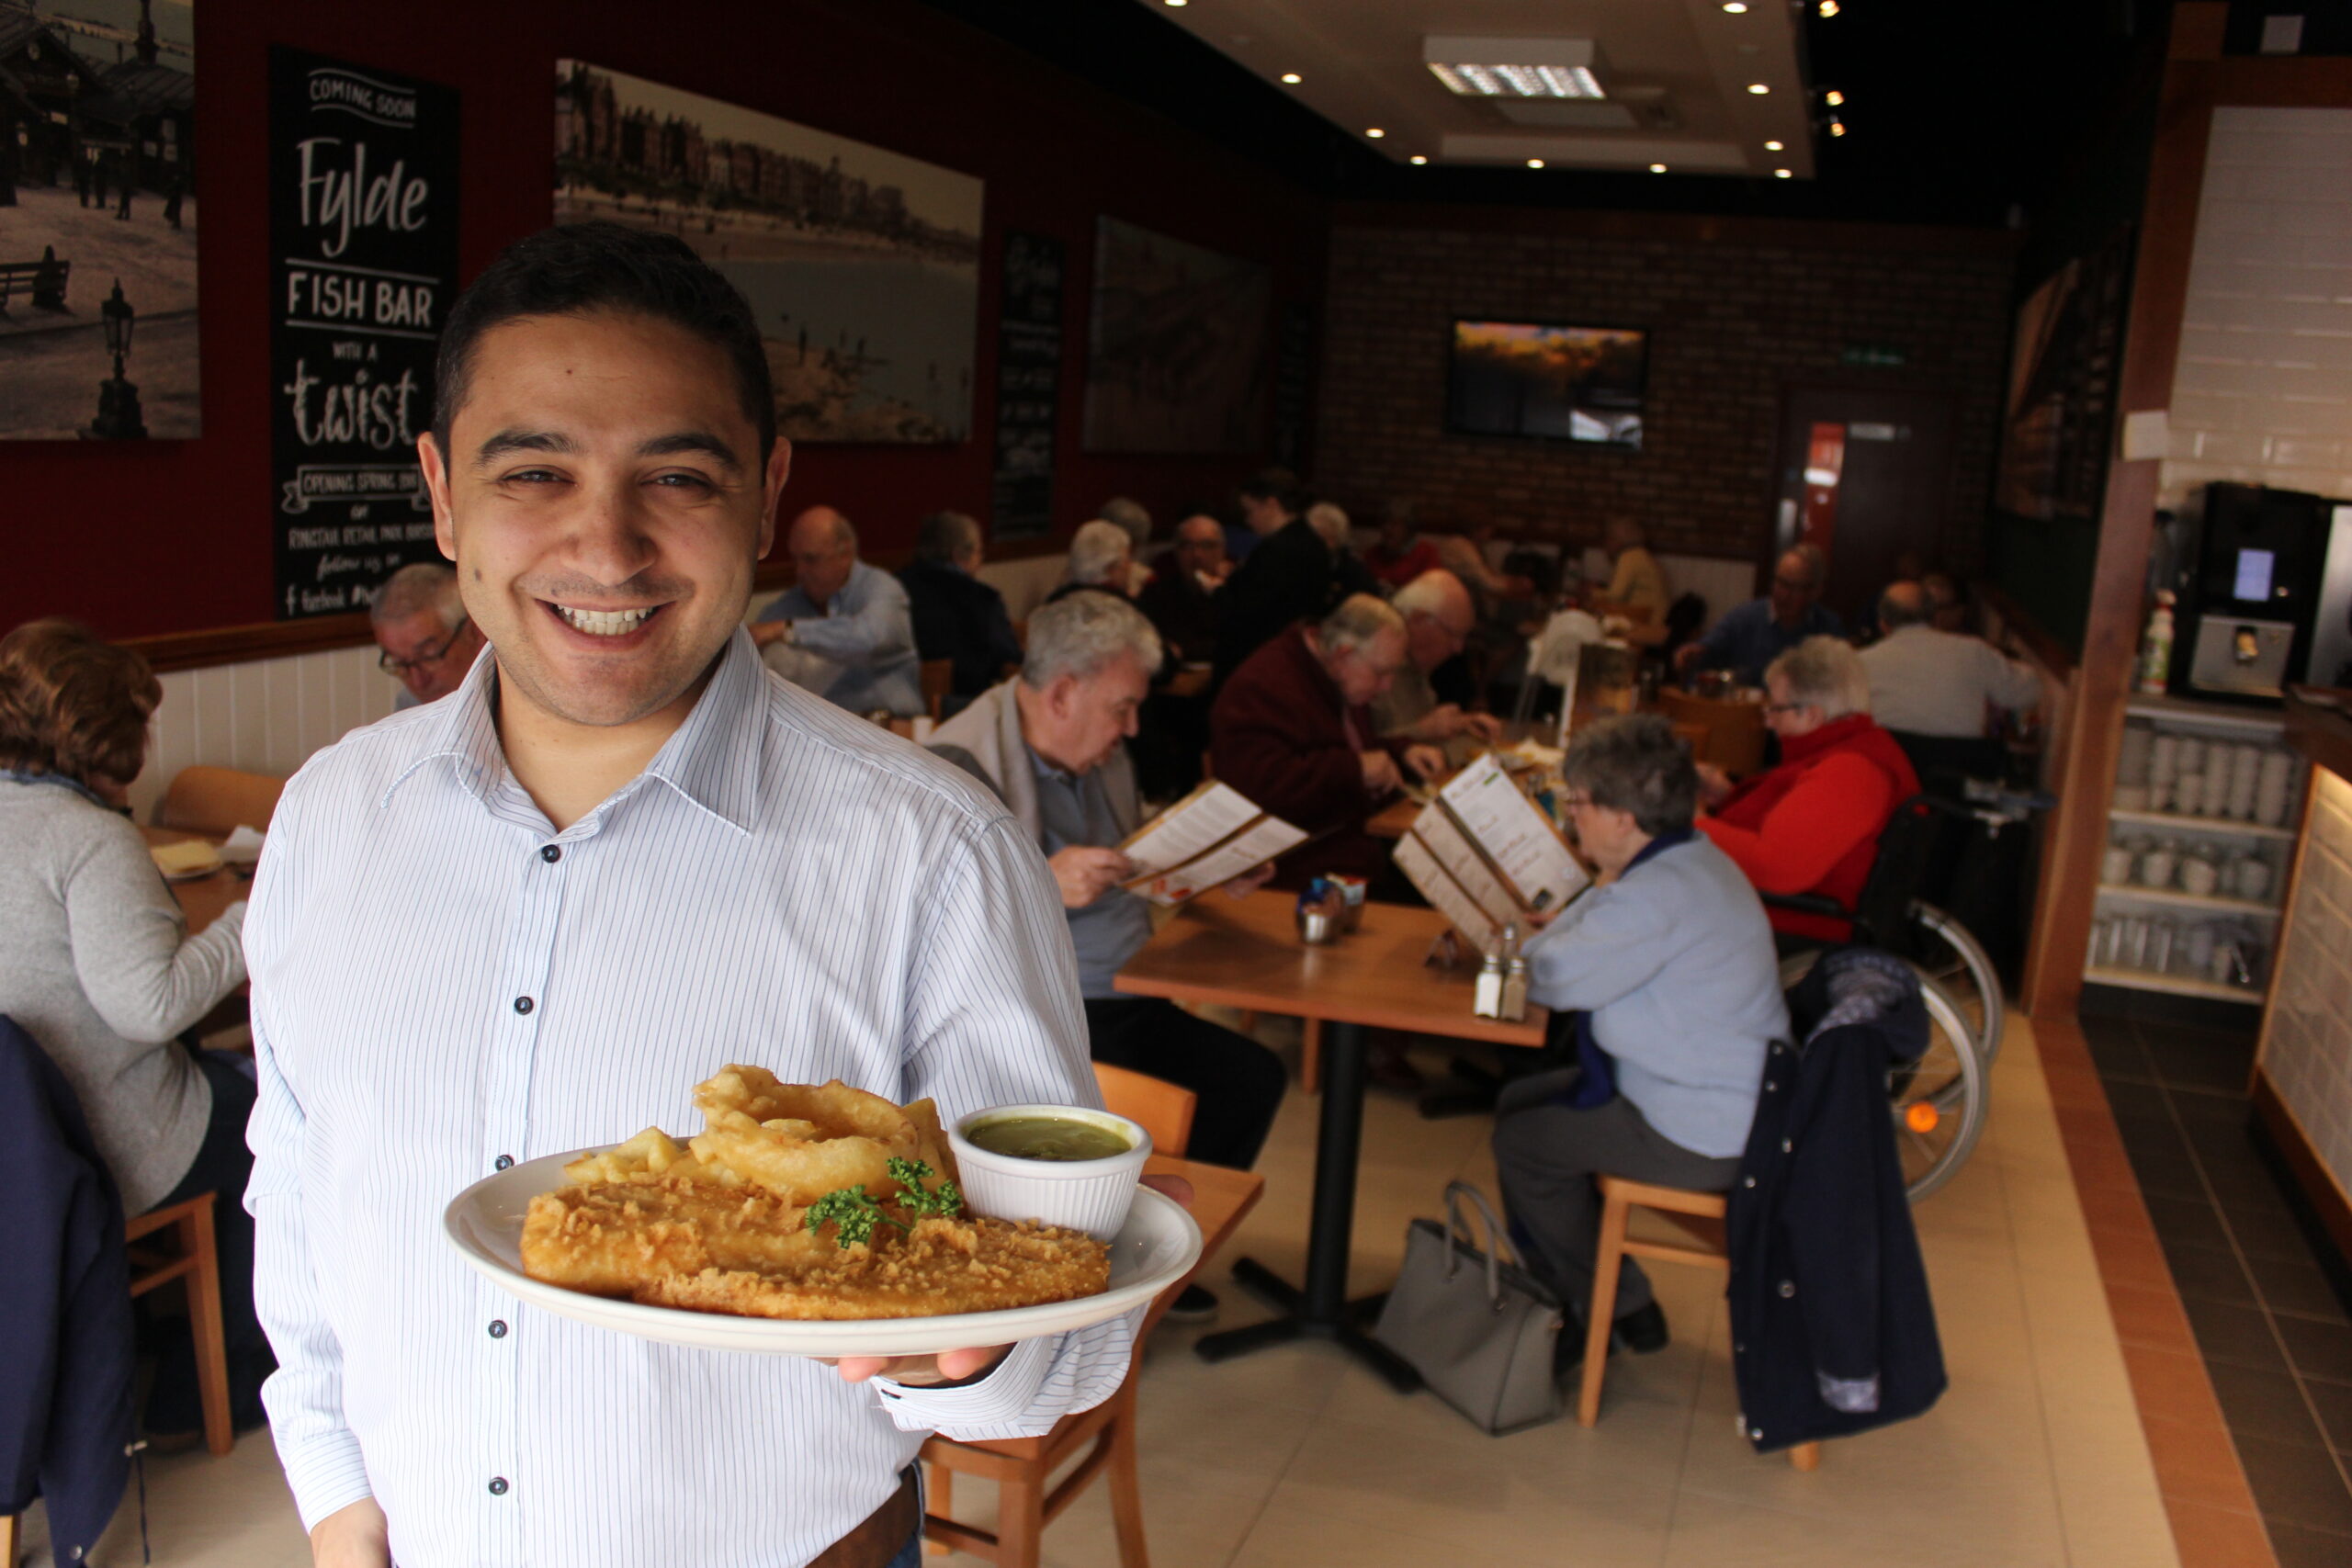 Changes have been made to the award winning Fylde Fish Bar fish and chip shops in Southport and Burscough to make them safer for diners. Owner Banico Zeniou pictured in the Fylde Fish Bar in Marshside, Southport, before the coronavirus lockdown came into force.